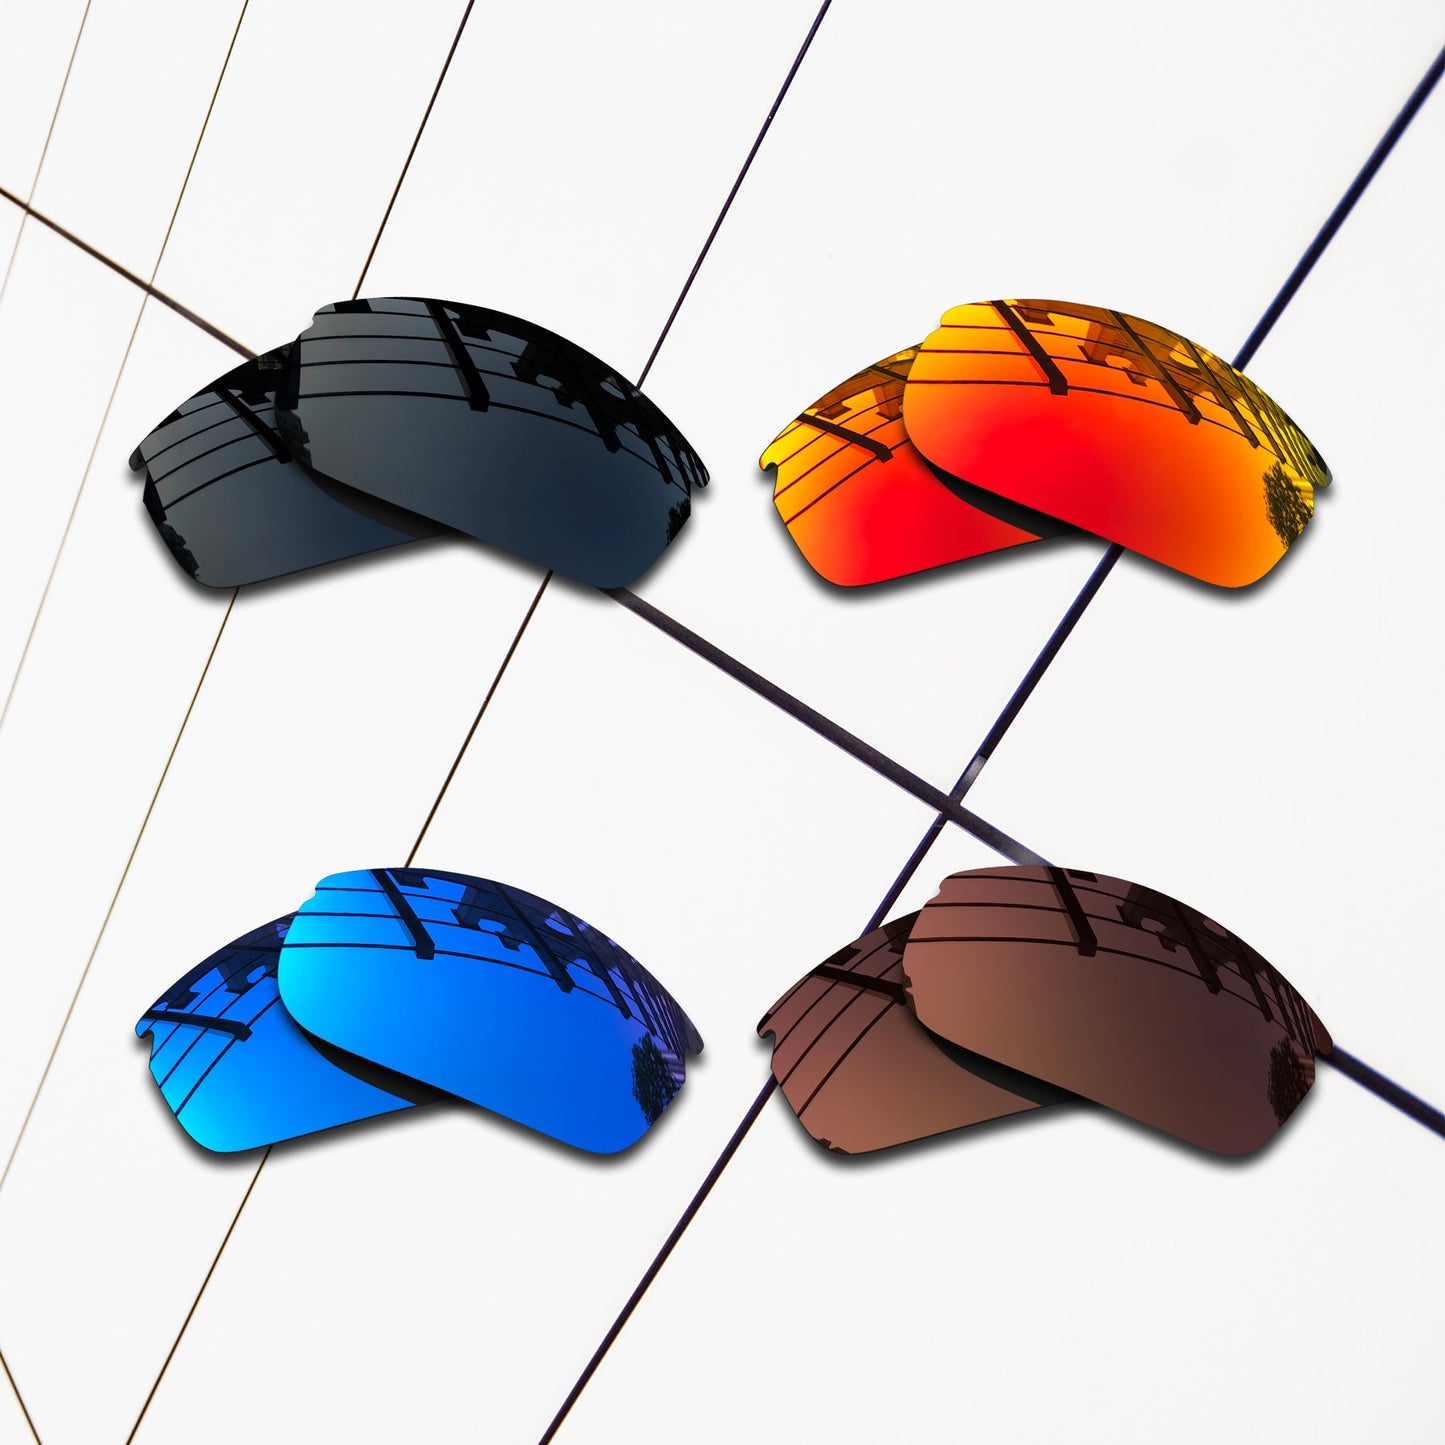 Polarized Replacement Lenses for Oakley Commit SQ Sunglasses